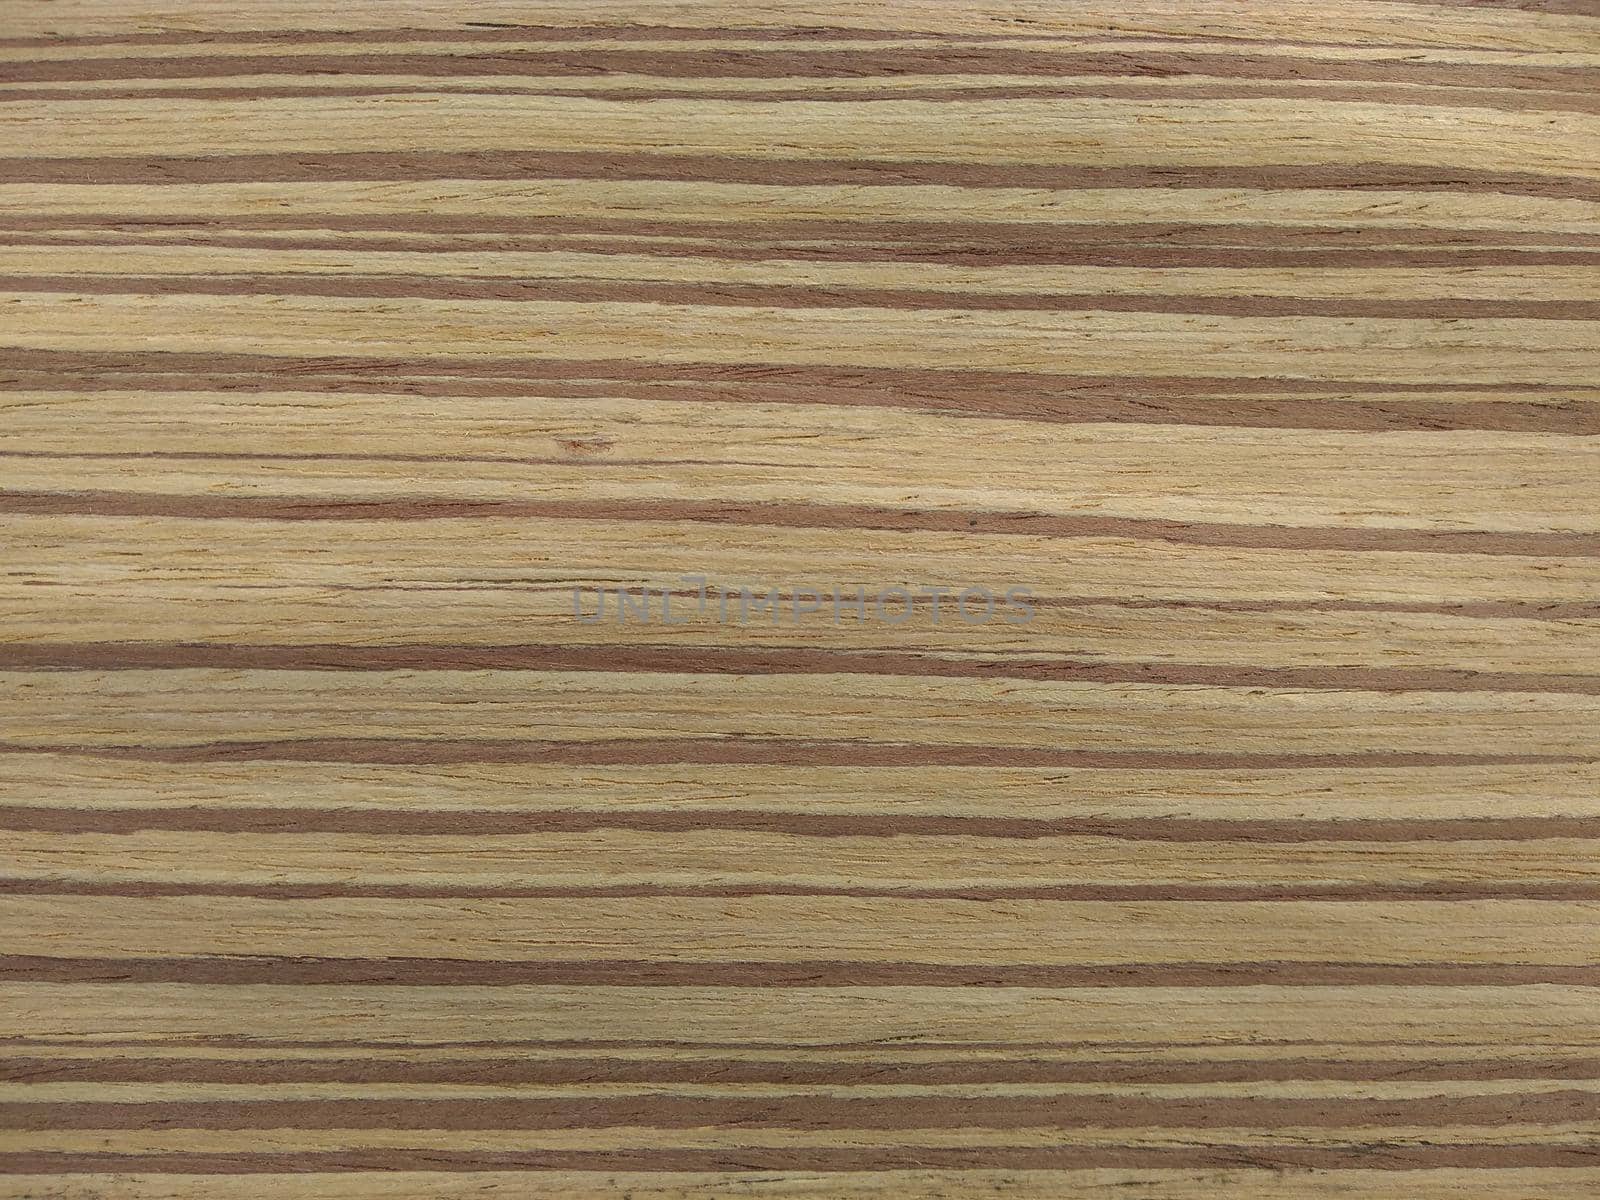 Natural zingano wood texture background. veneer surface for interior and exterior manufacturers use.